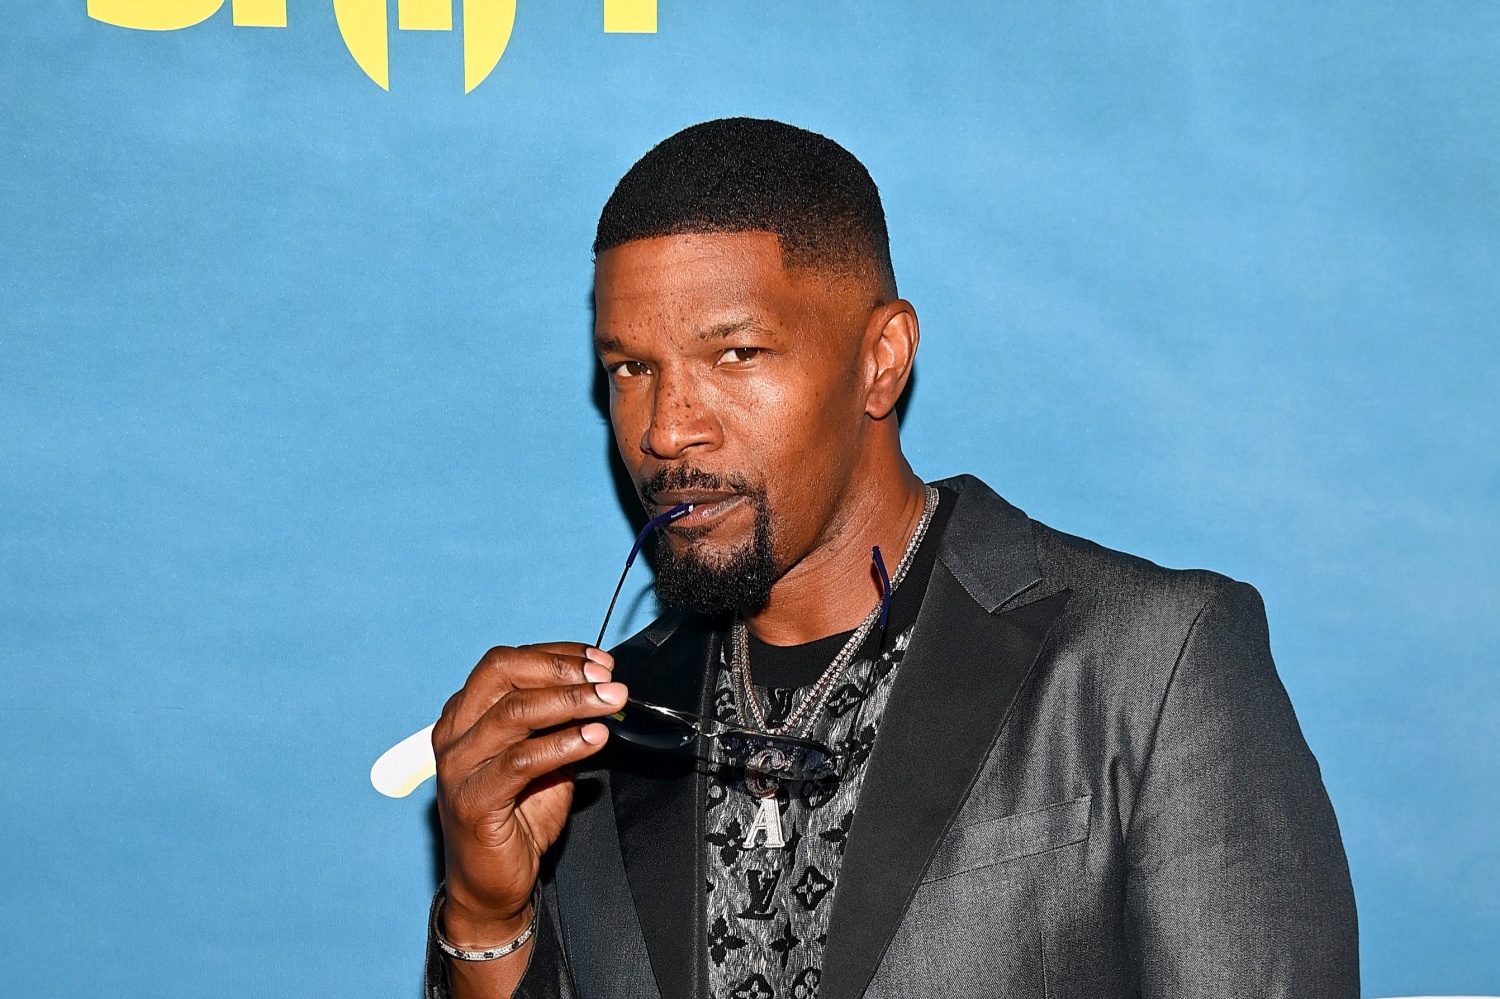 WATCH: 'Emotional' Jamie Foxx Drops Hint on Exact Health Scare He Suffered From